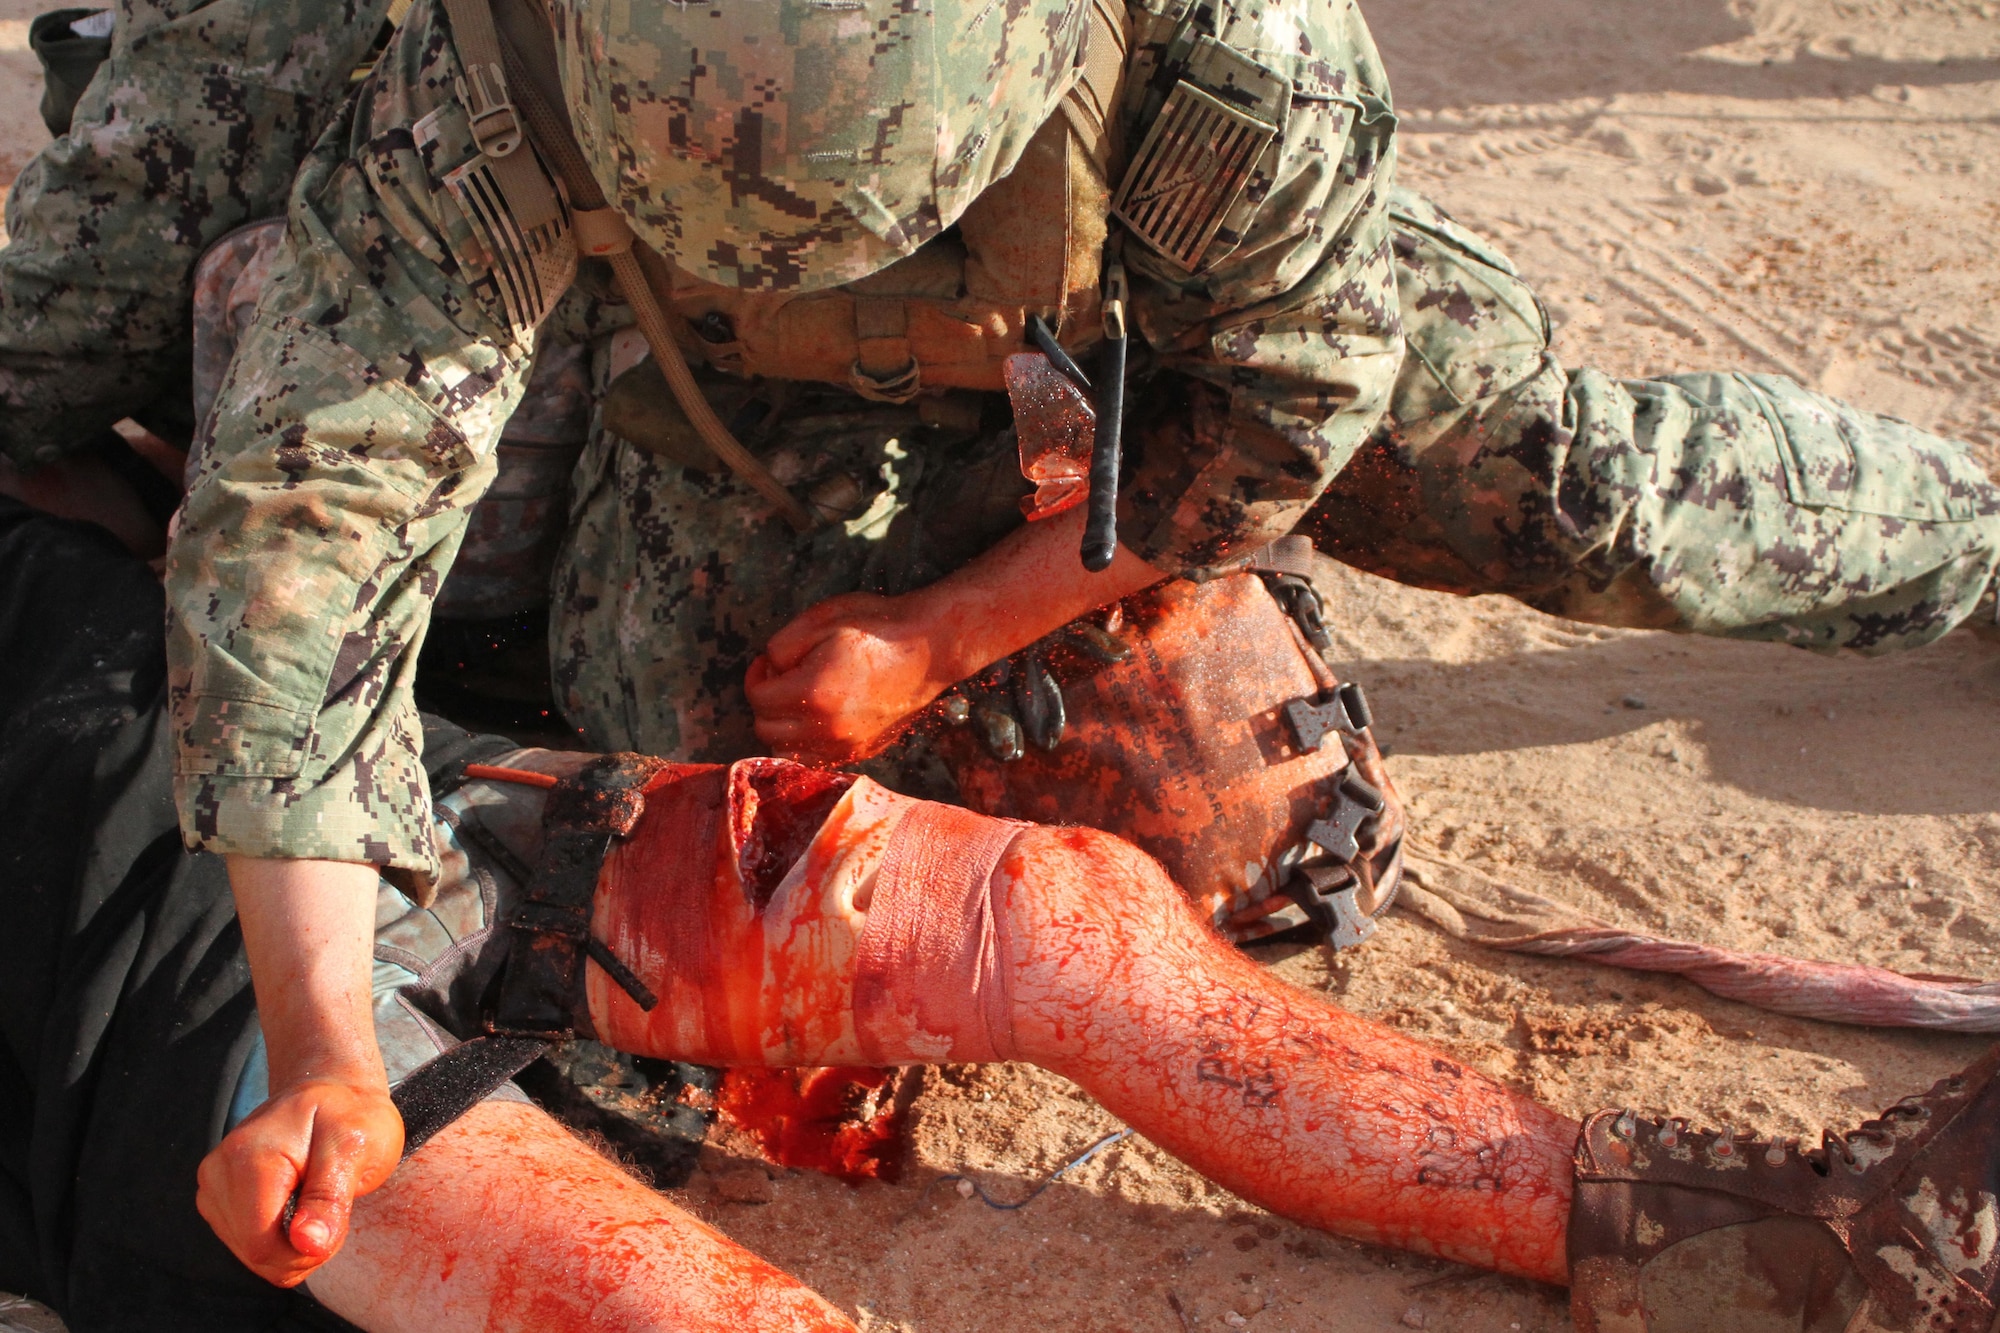 A U.S. Navy master-at-arms applies a tourniquet to a simulated improvised explosive device victim.